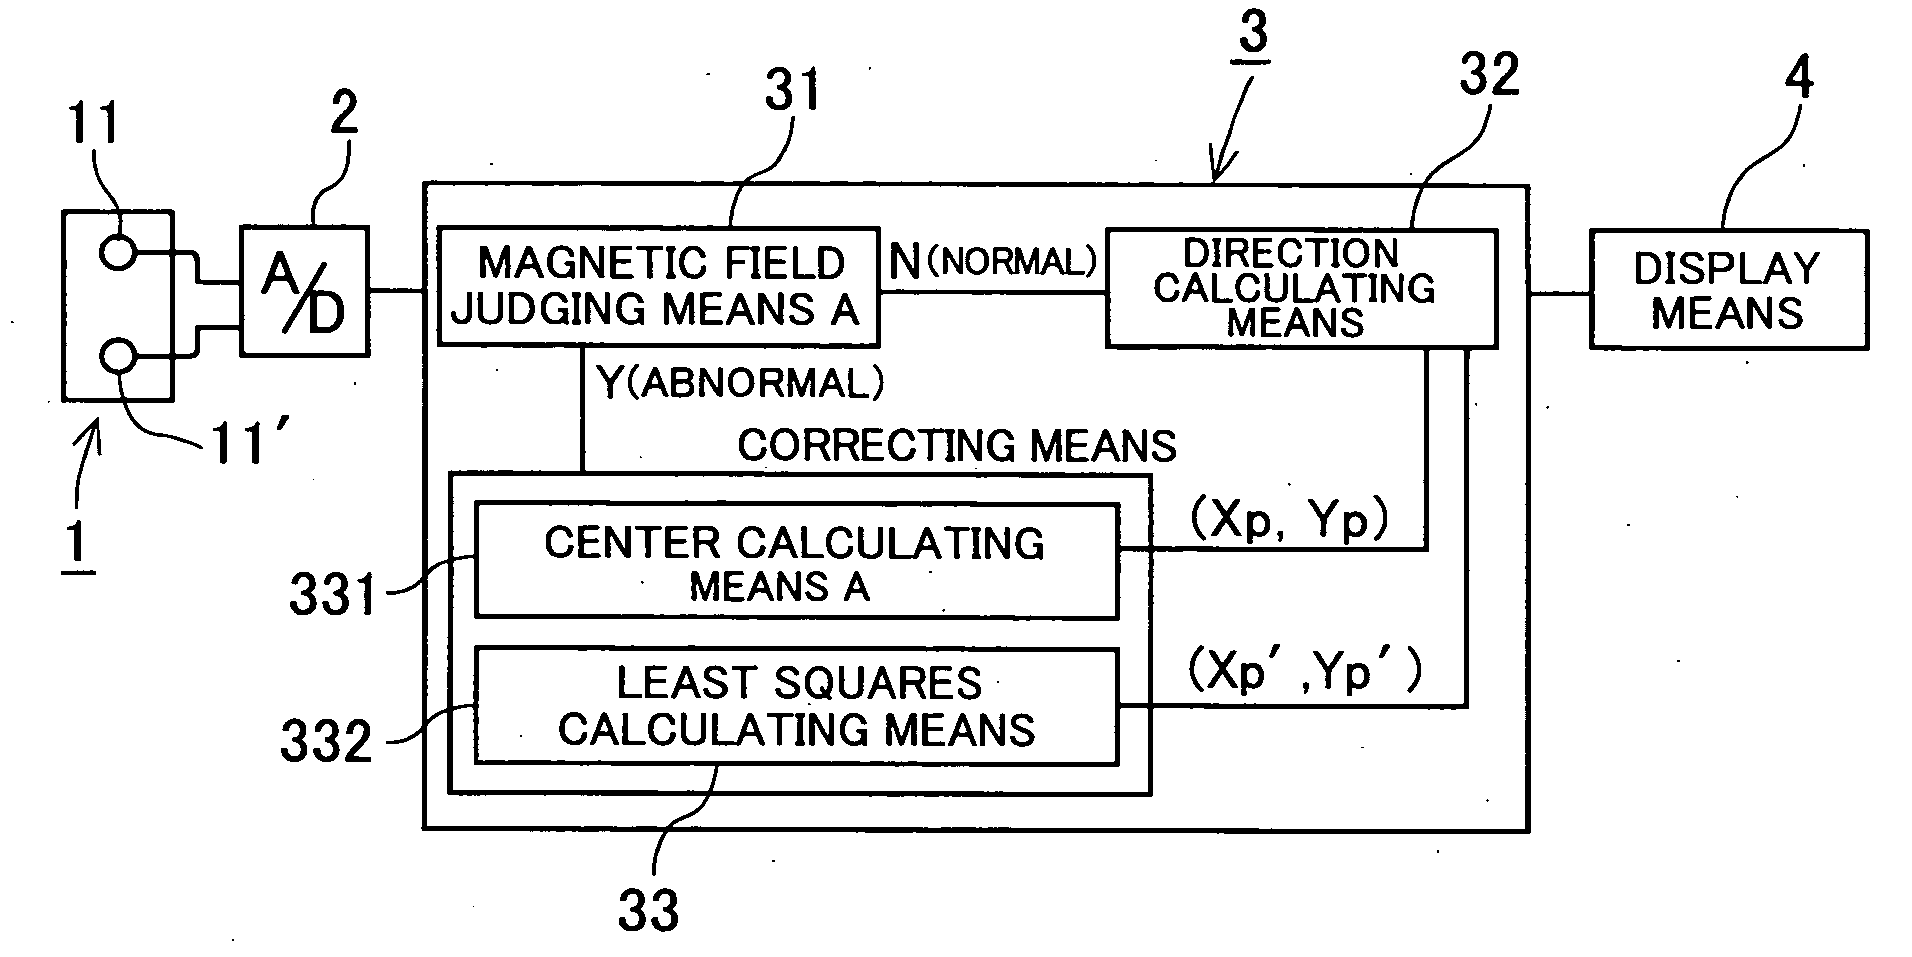 Electronic compass and direction finding method